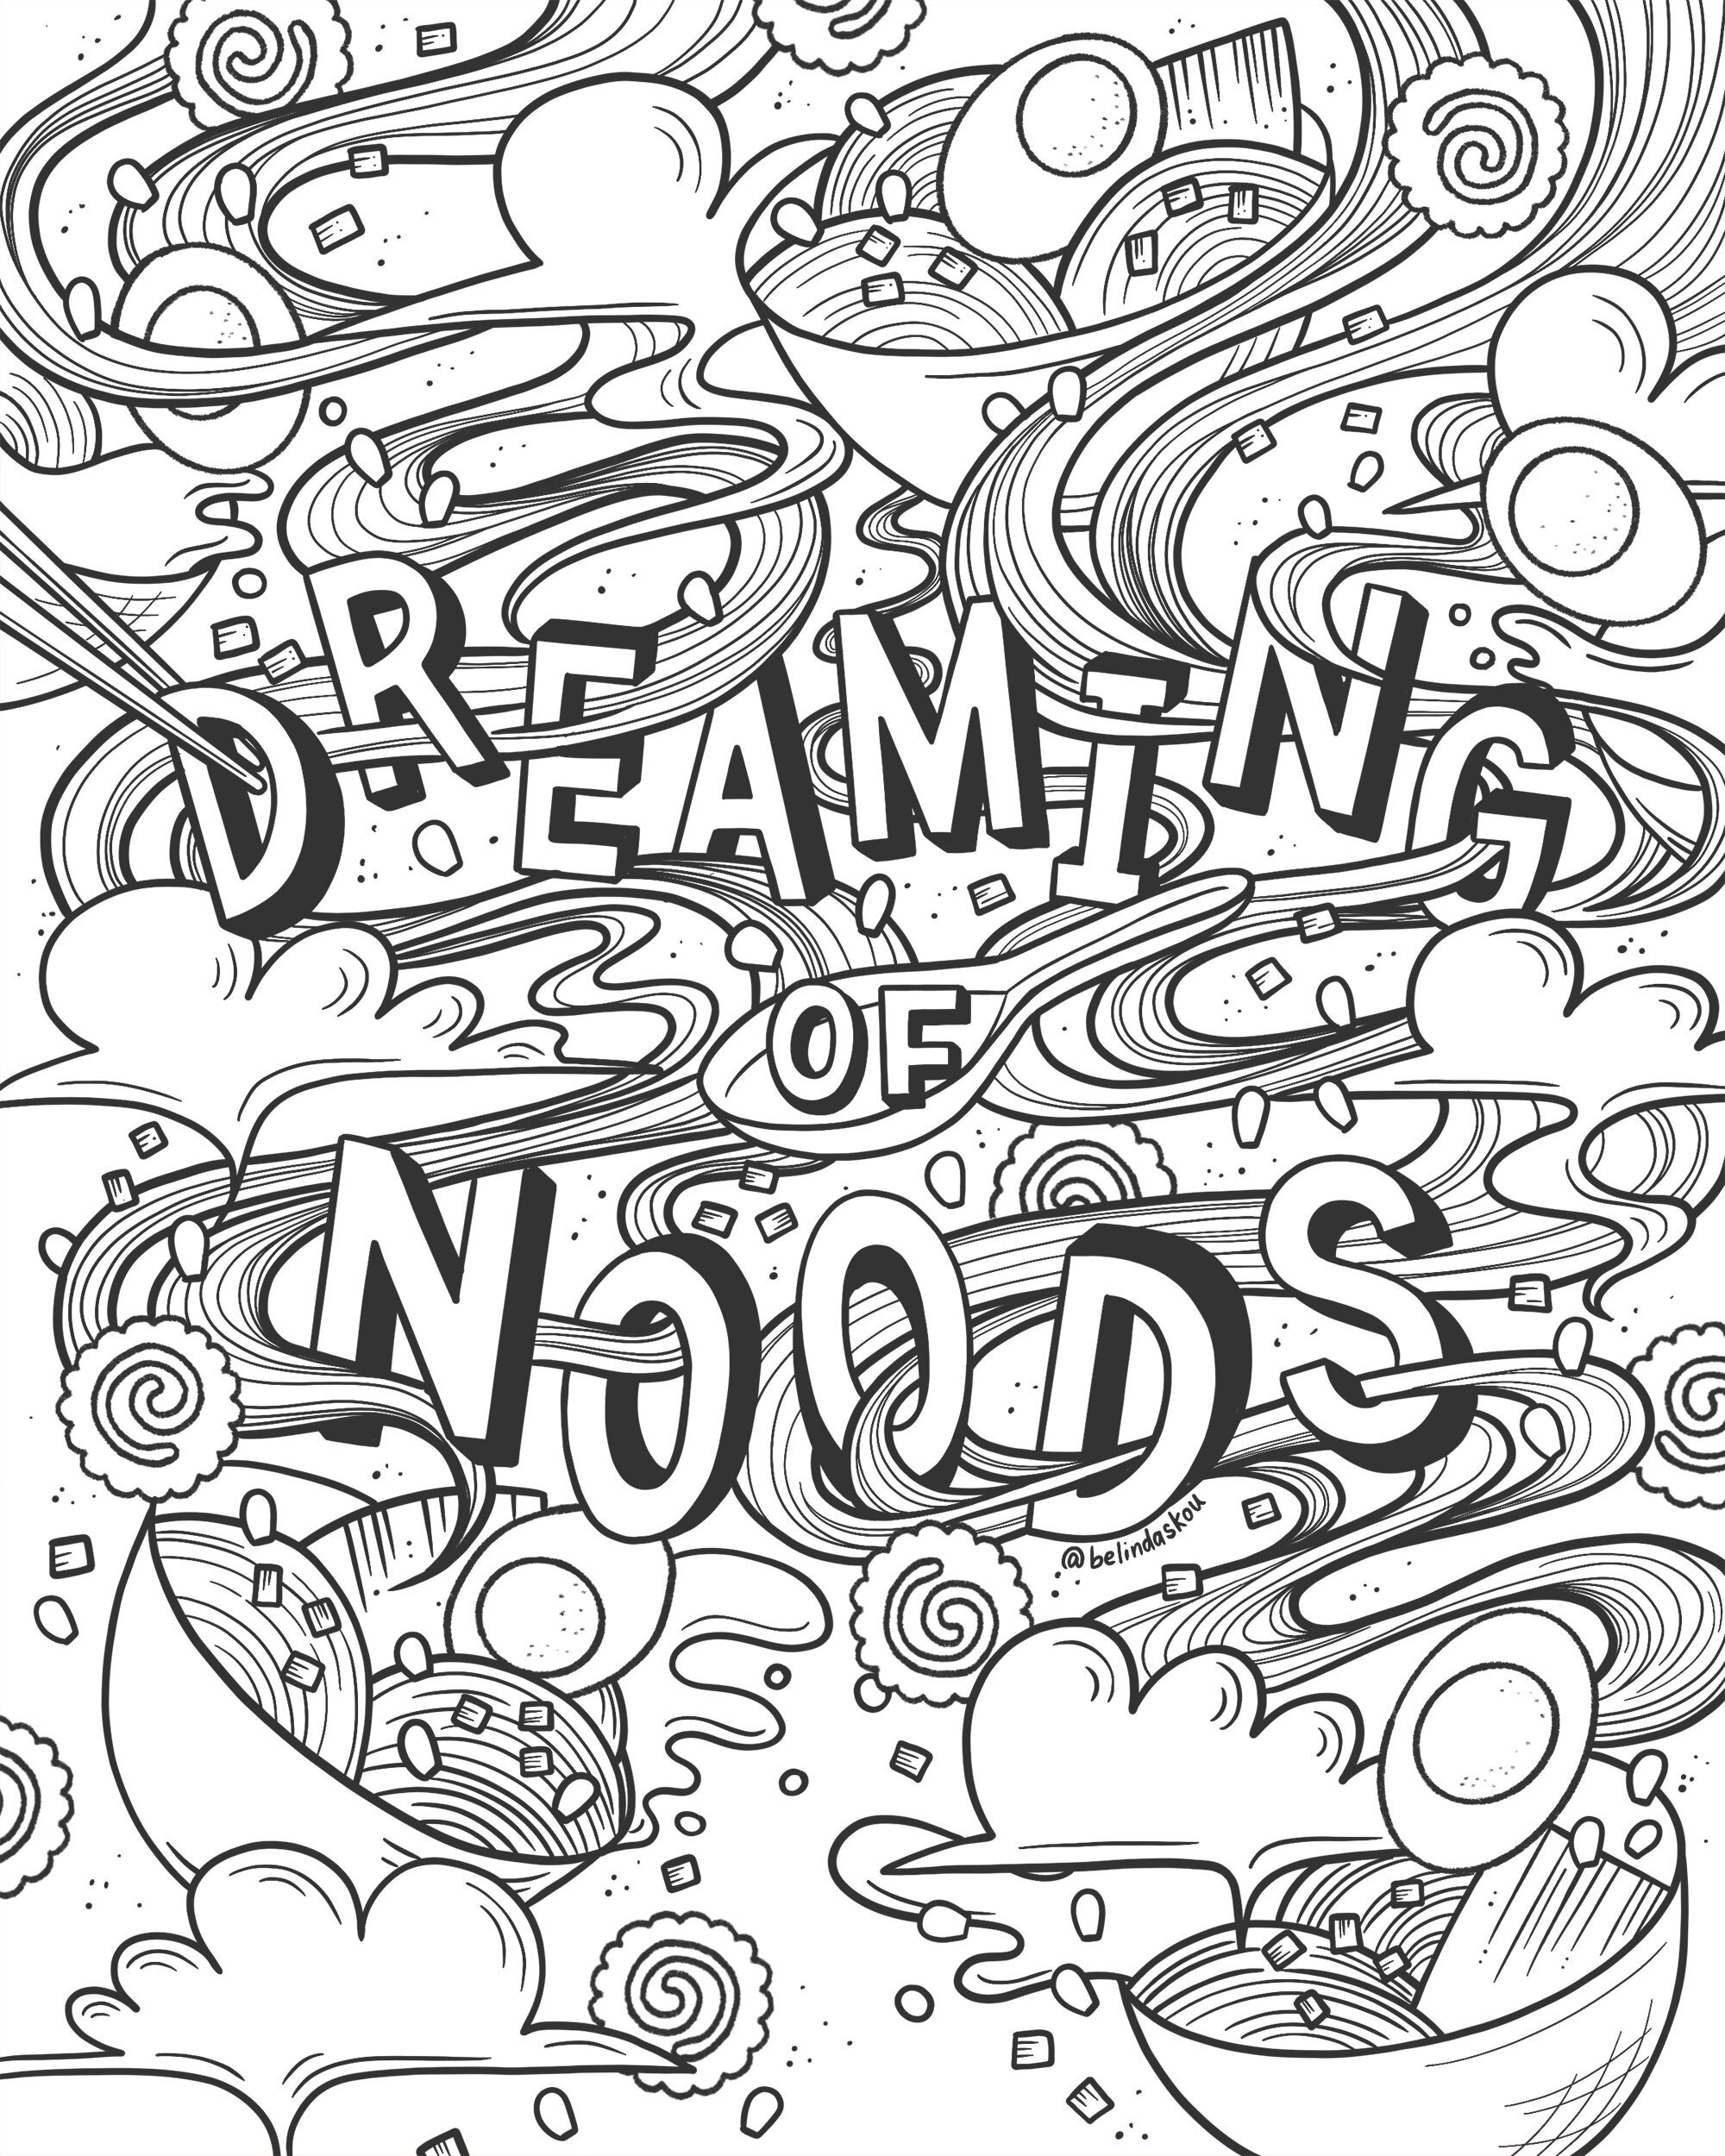 Dreaming of Noods Coloring Page — Belinda   Lettering Artist and ...